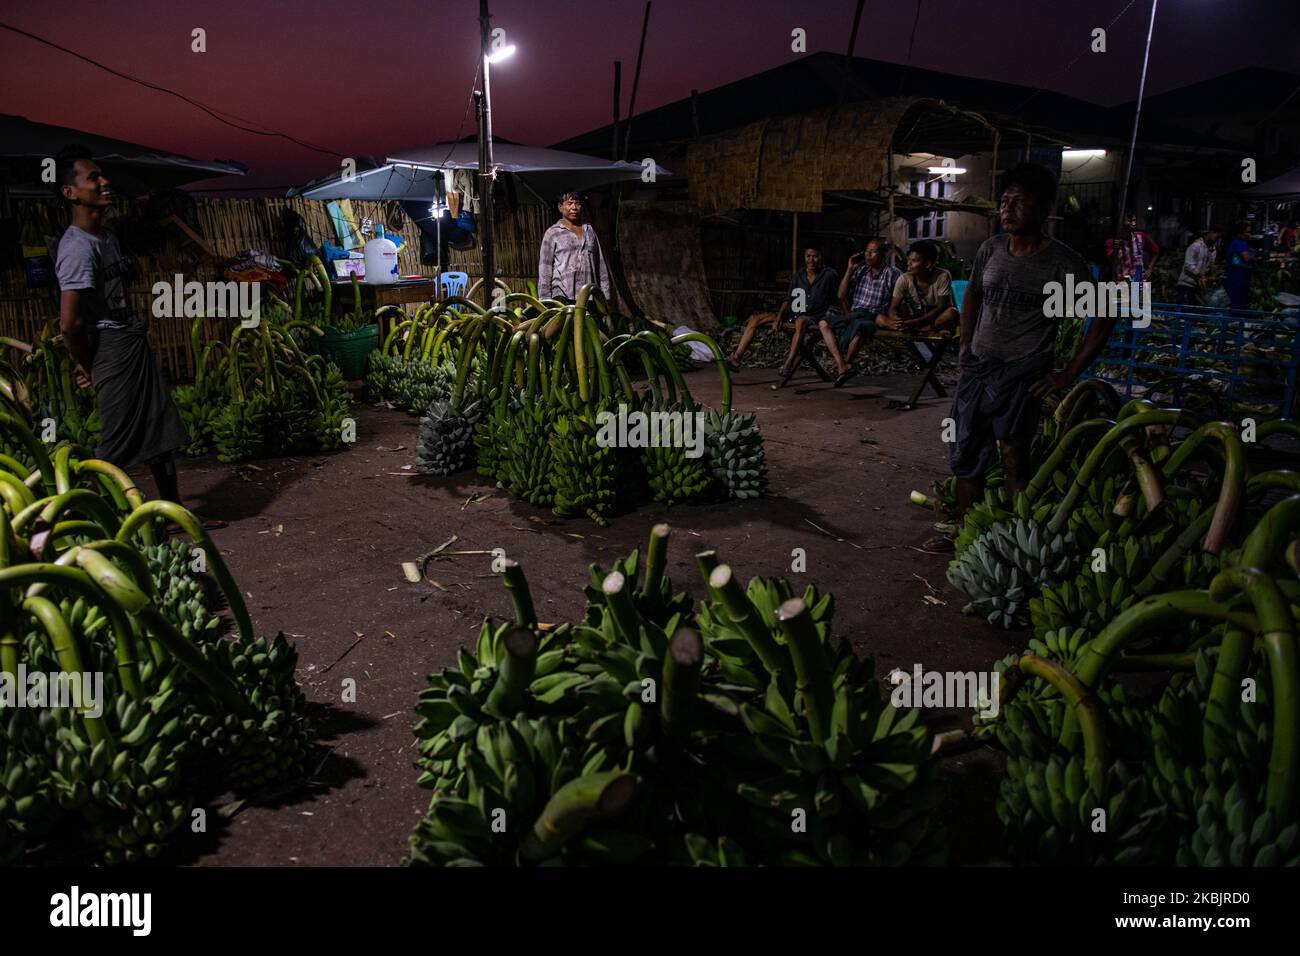 Workers during their break time near a pile of bananas at a wholesale market in Yangon, Myanmar on March 10, 2020. (Photo by Shwe Paw Mya Tin/NurPhoto) Stock Photo